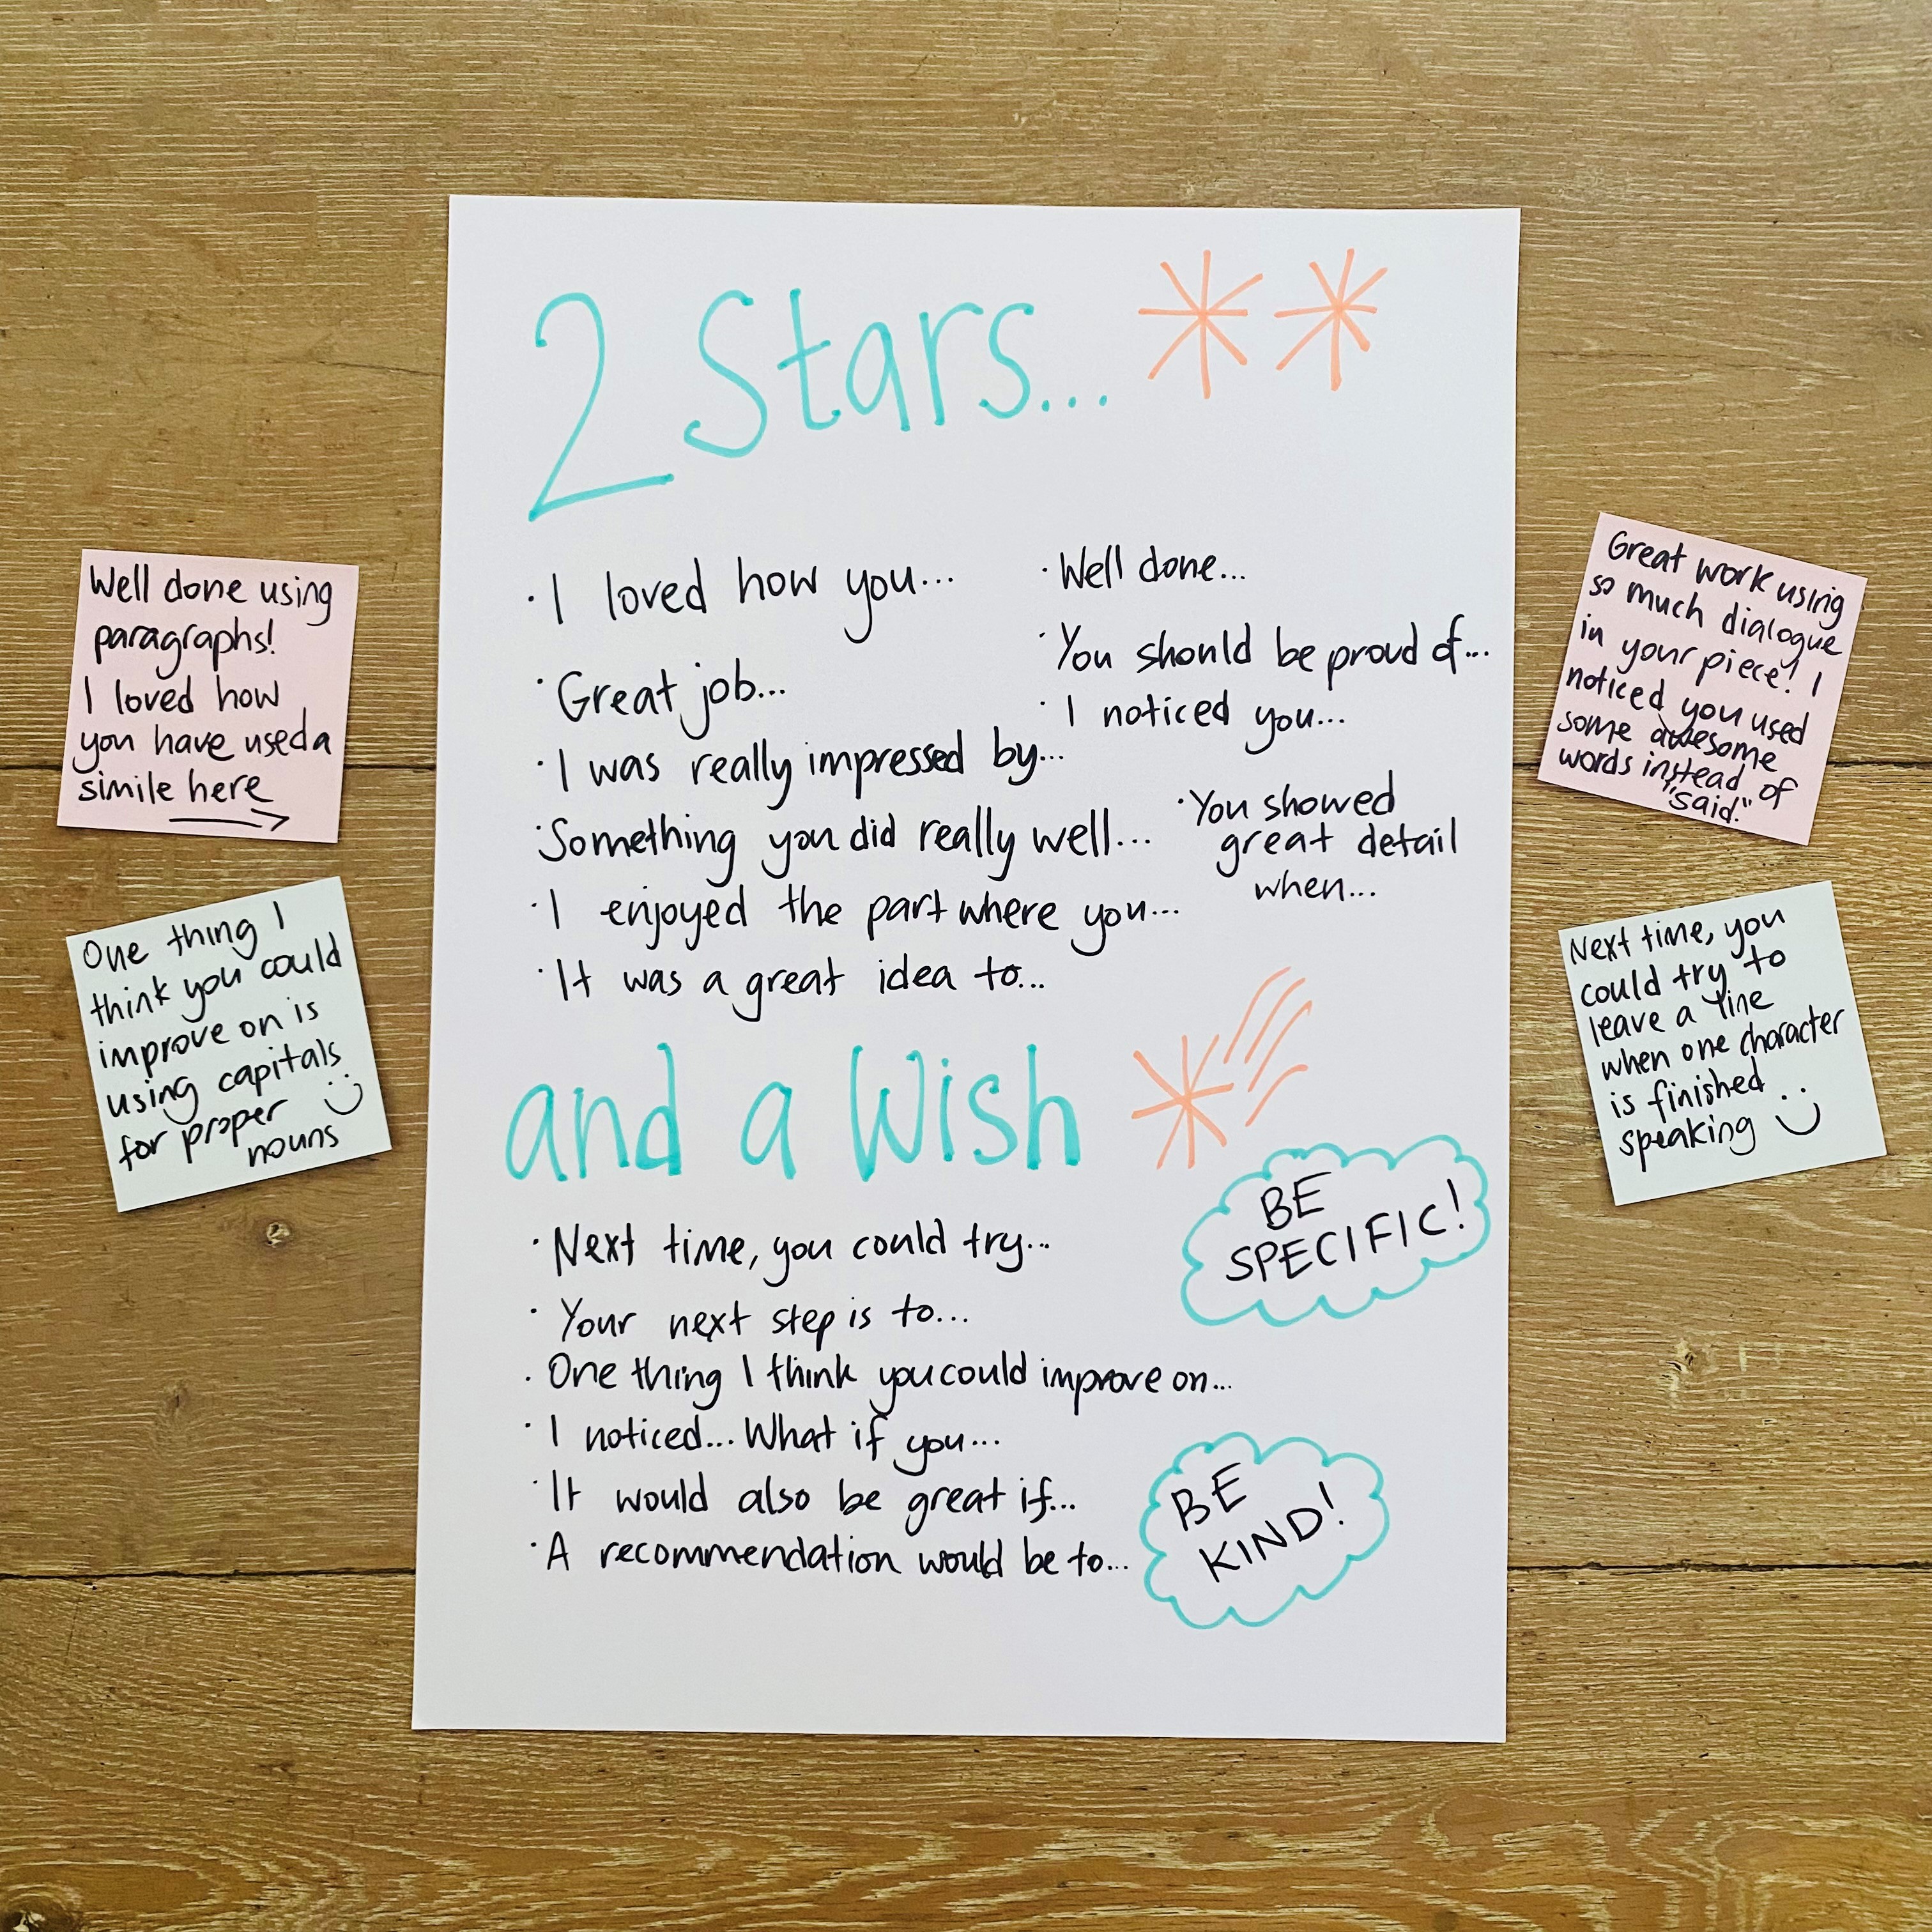 A valuable and engaging speaking and listening lesson that equips students with the skills to provide each other with meaningful, specific and positive feedback. Students are taught to use the 2 stars and a wish model which provides them with the tools to identify strengths and areas for improvements in their partner’s work. 